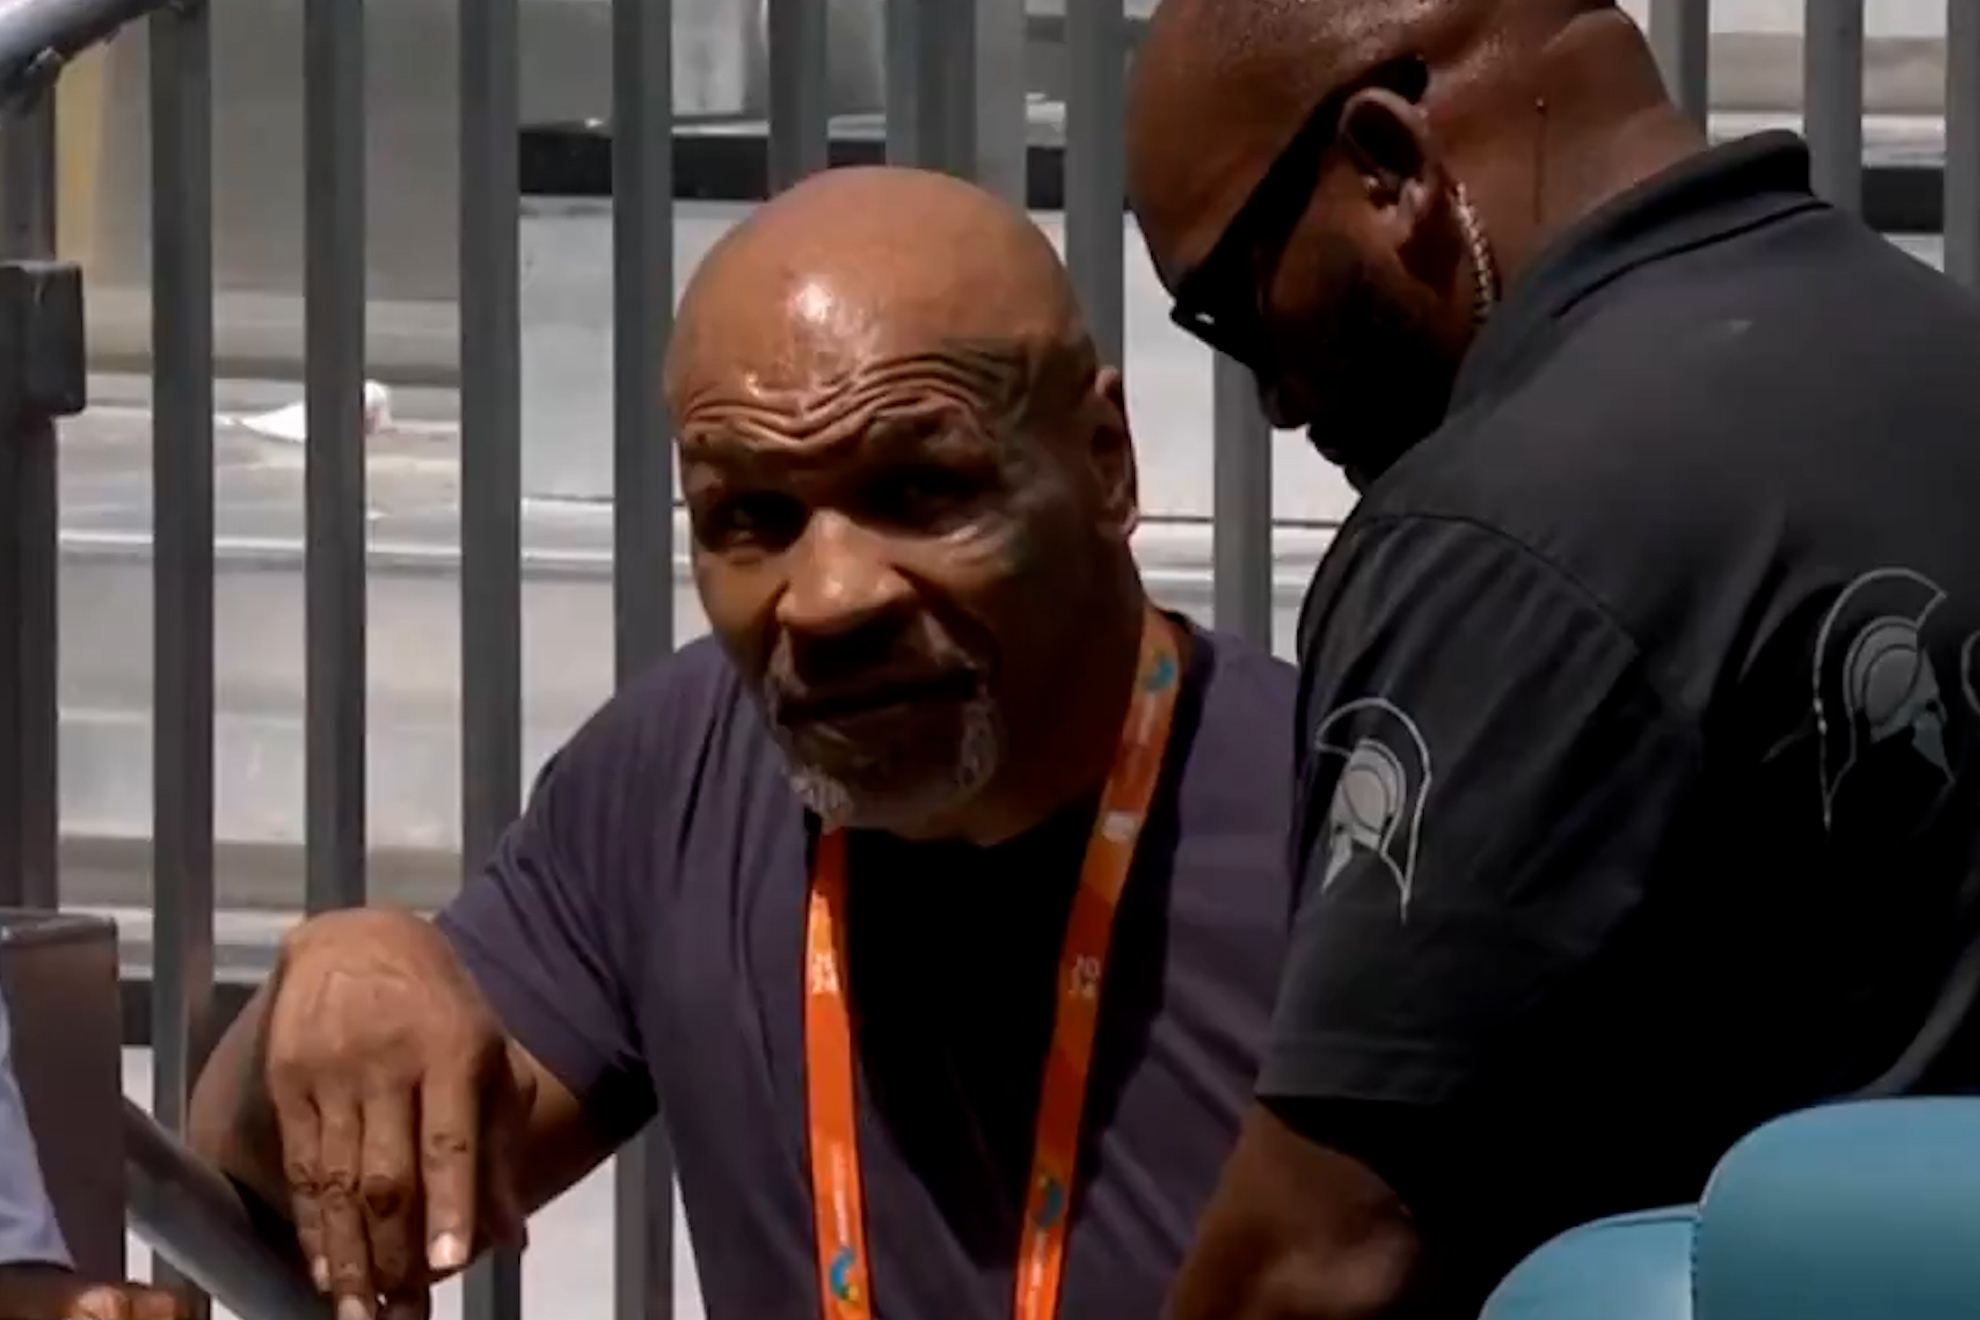 Mike Tyson stopped by security at Miami Open